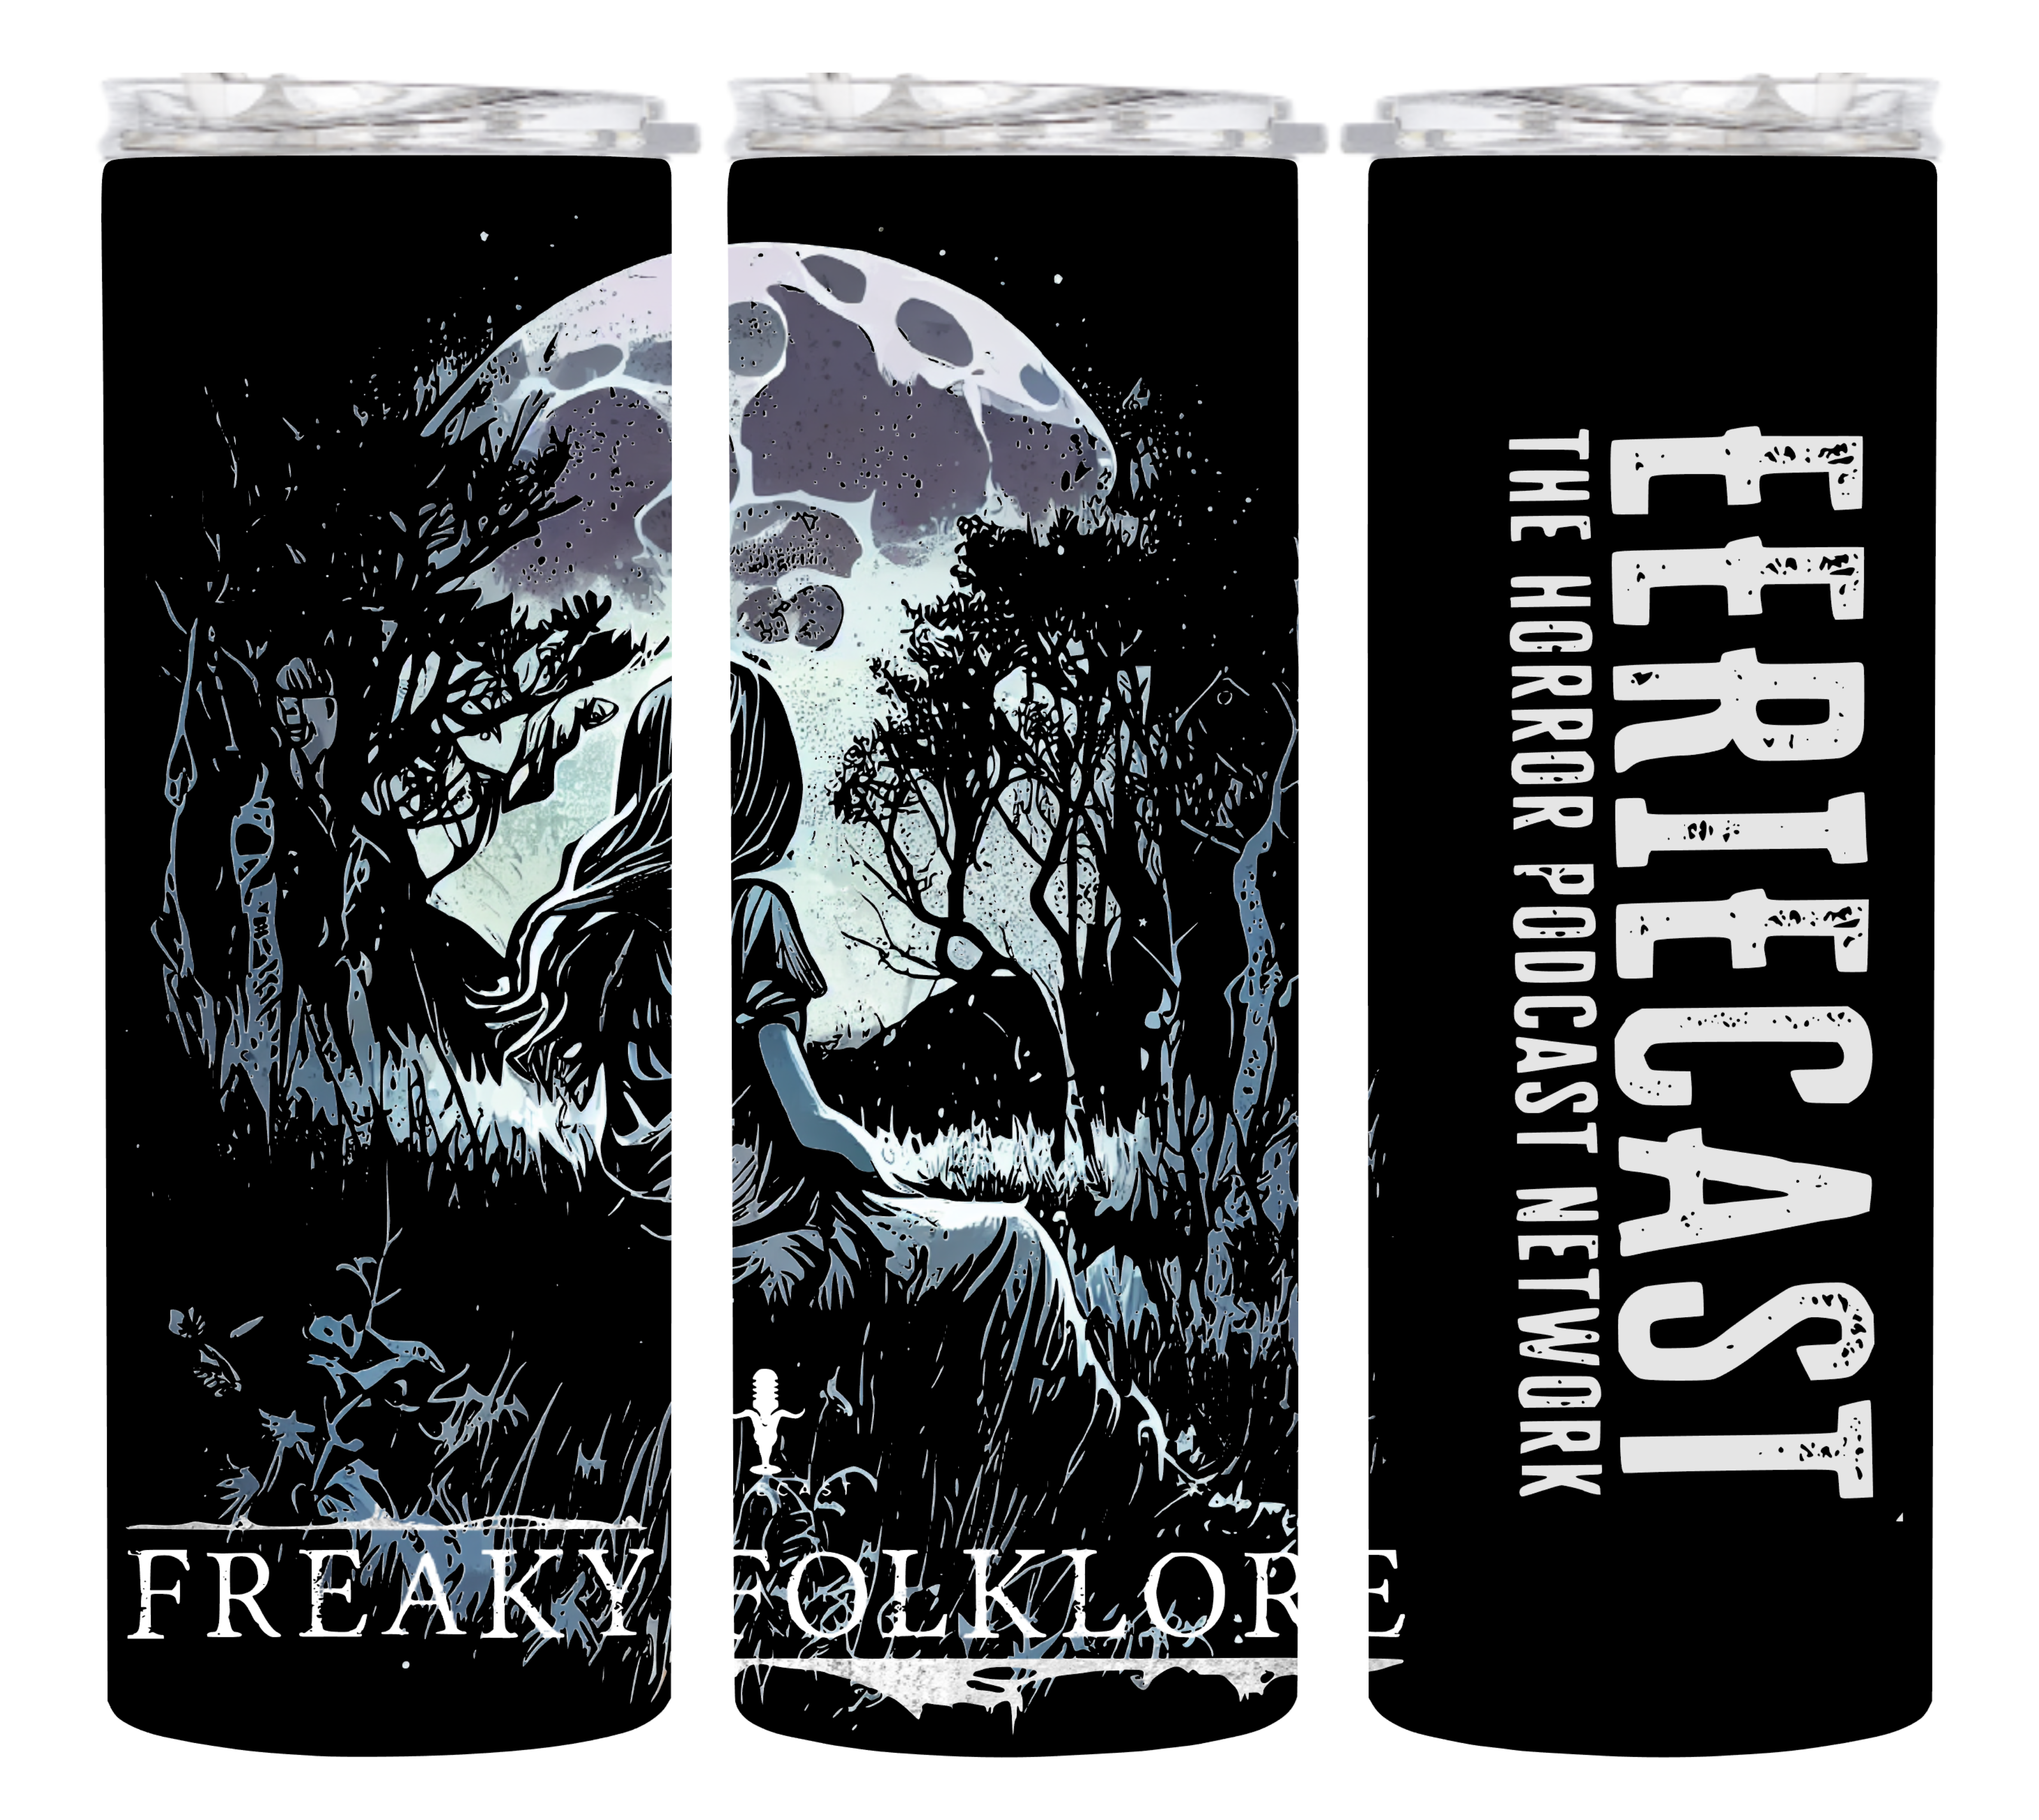 Listen to Freaky Folklore podcast